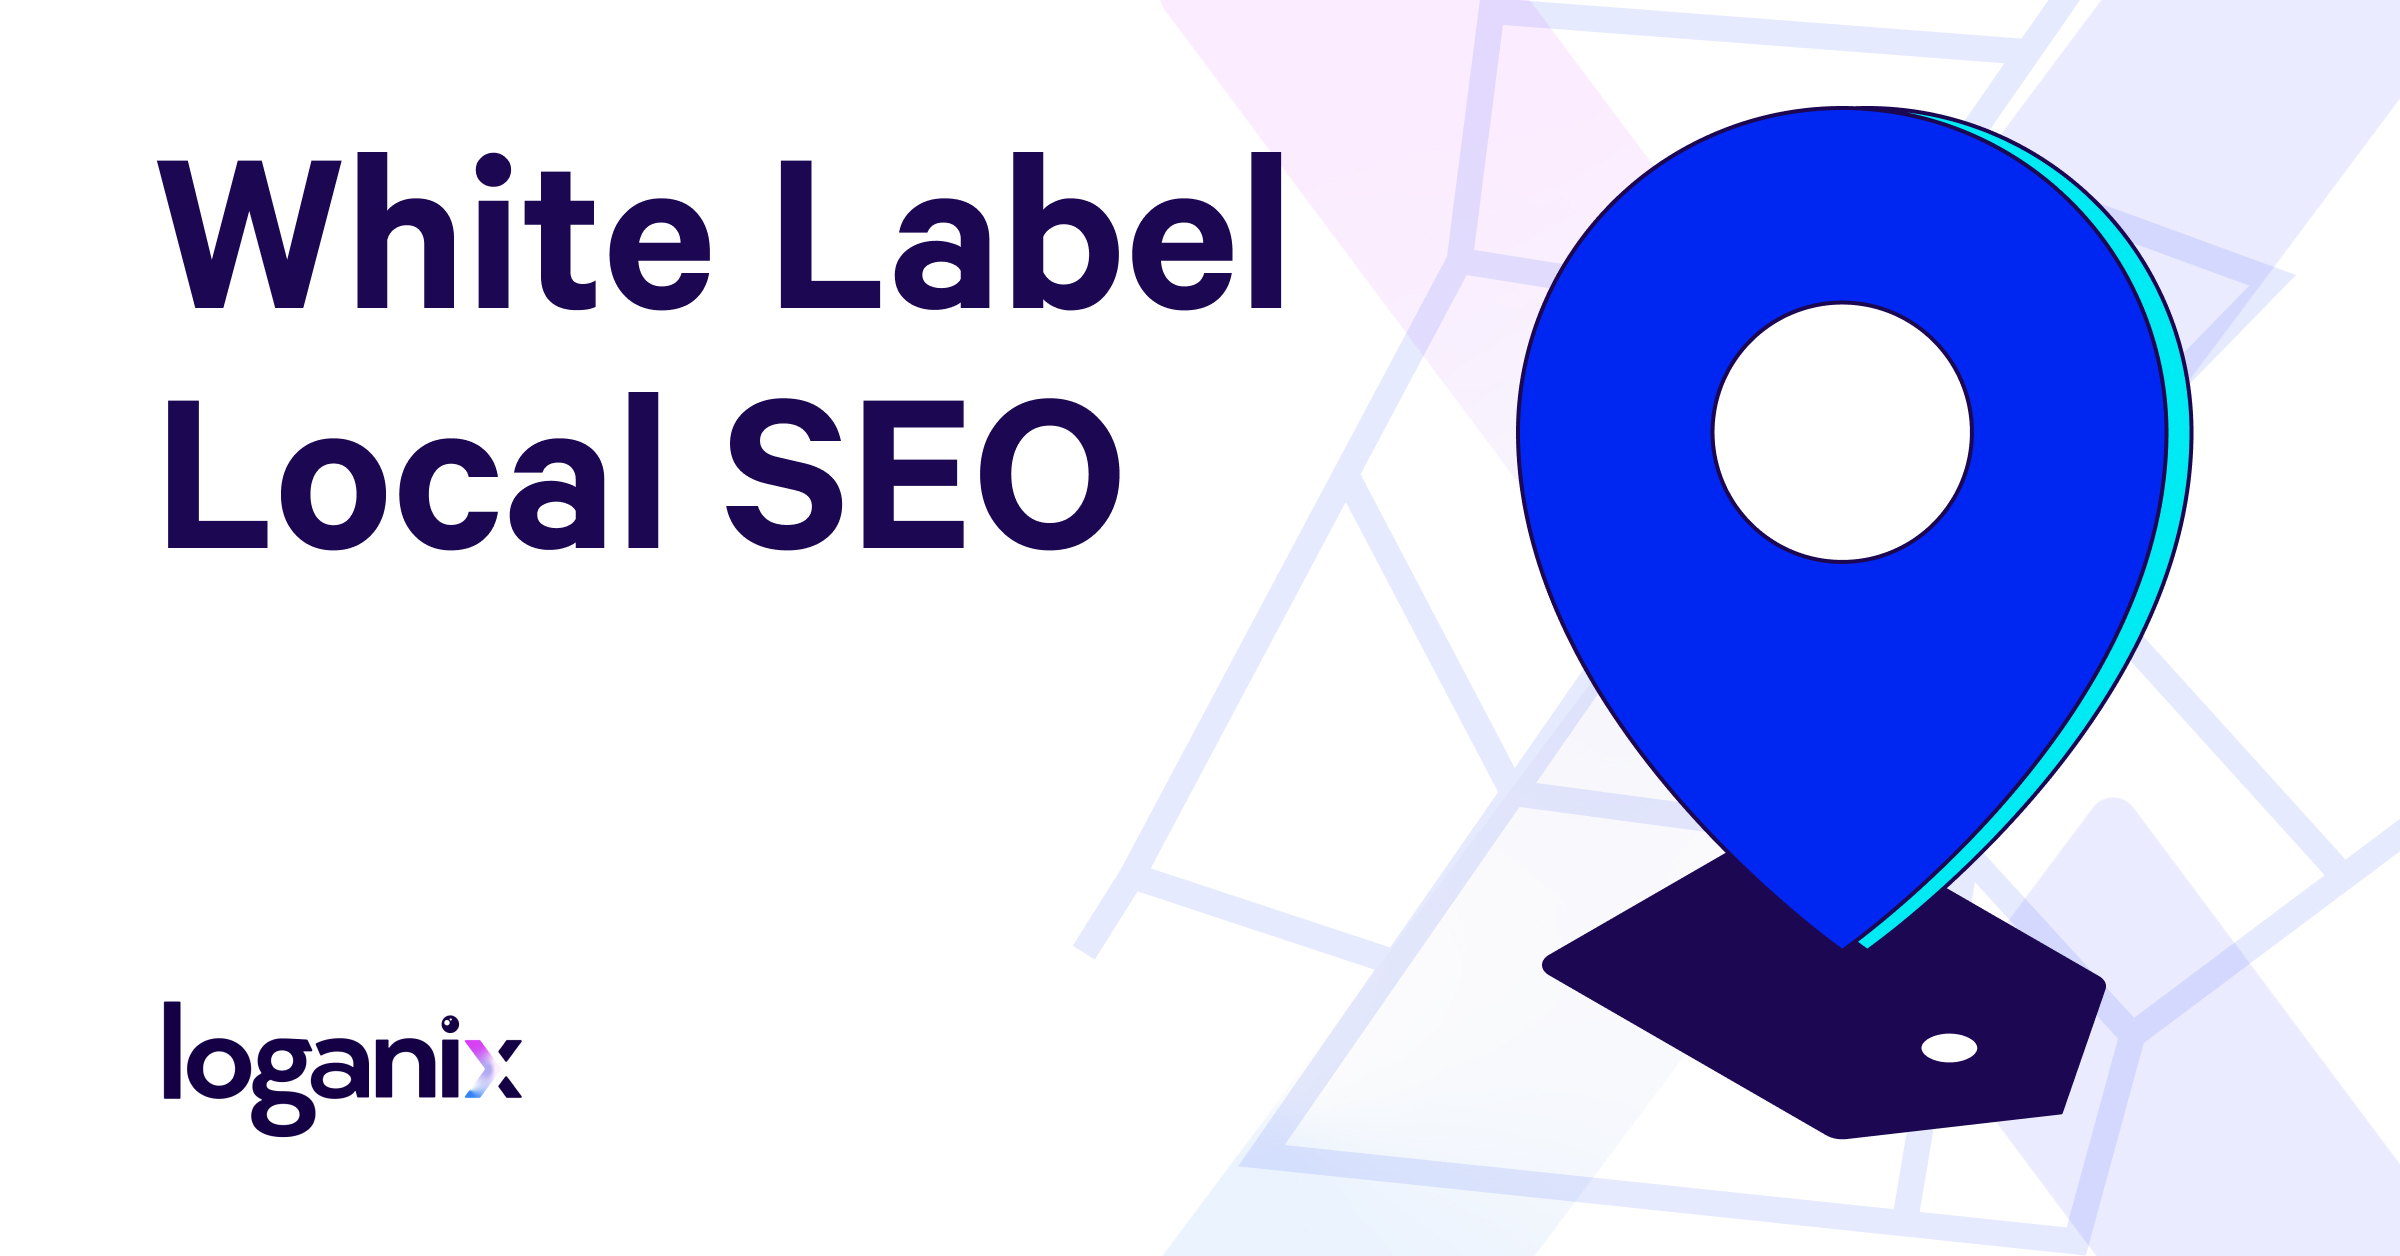 White Label Local Seo Services: Boost Your Brand's Visibility